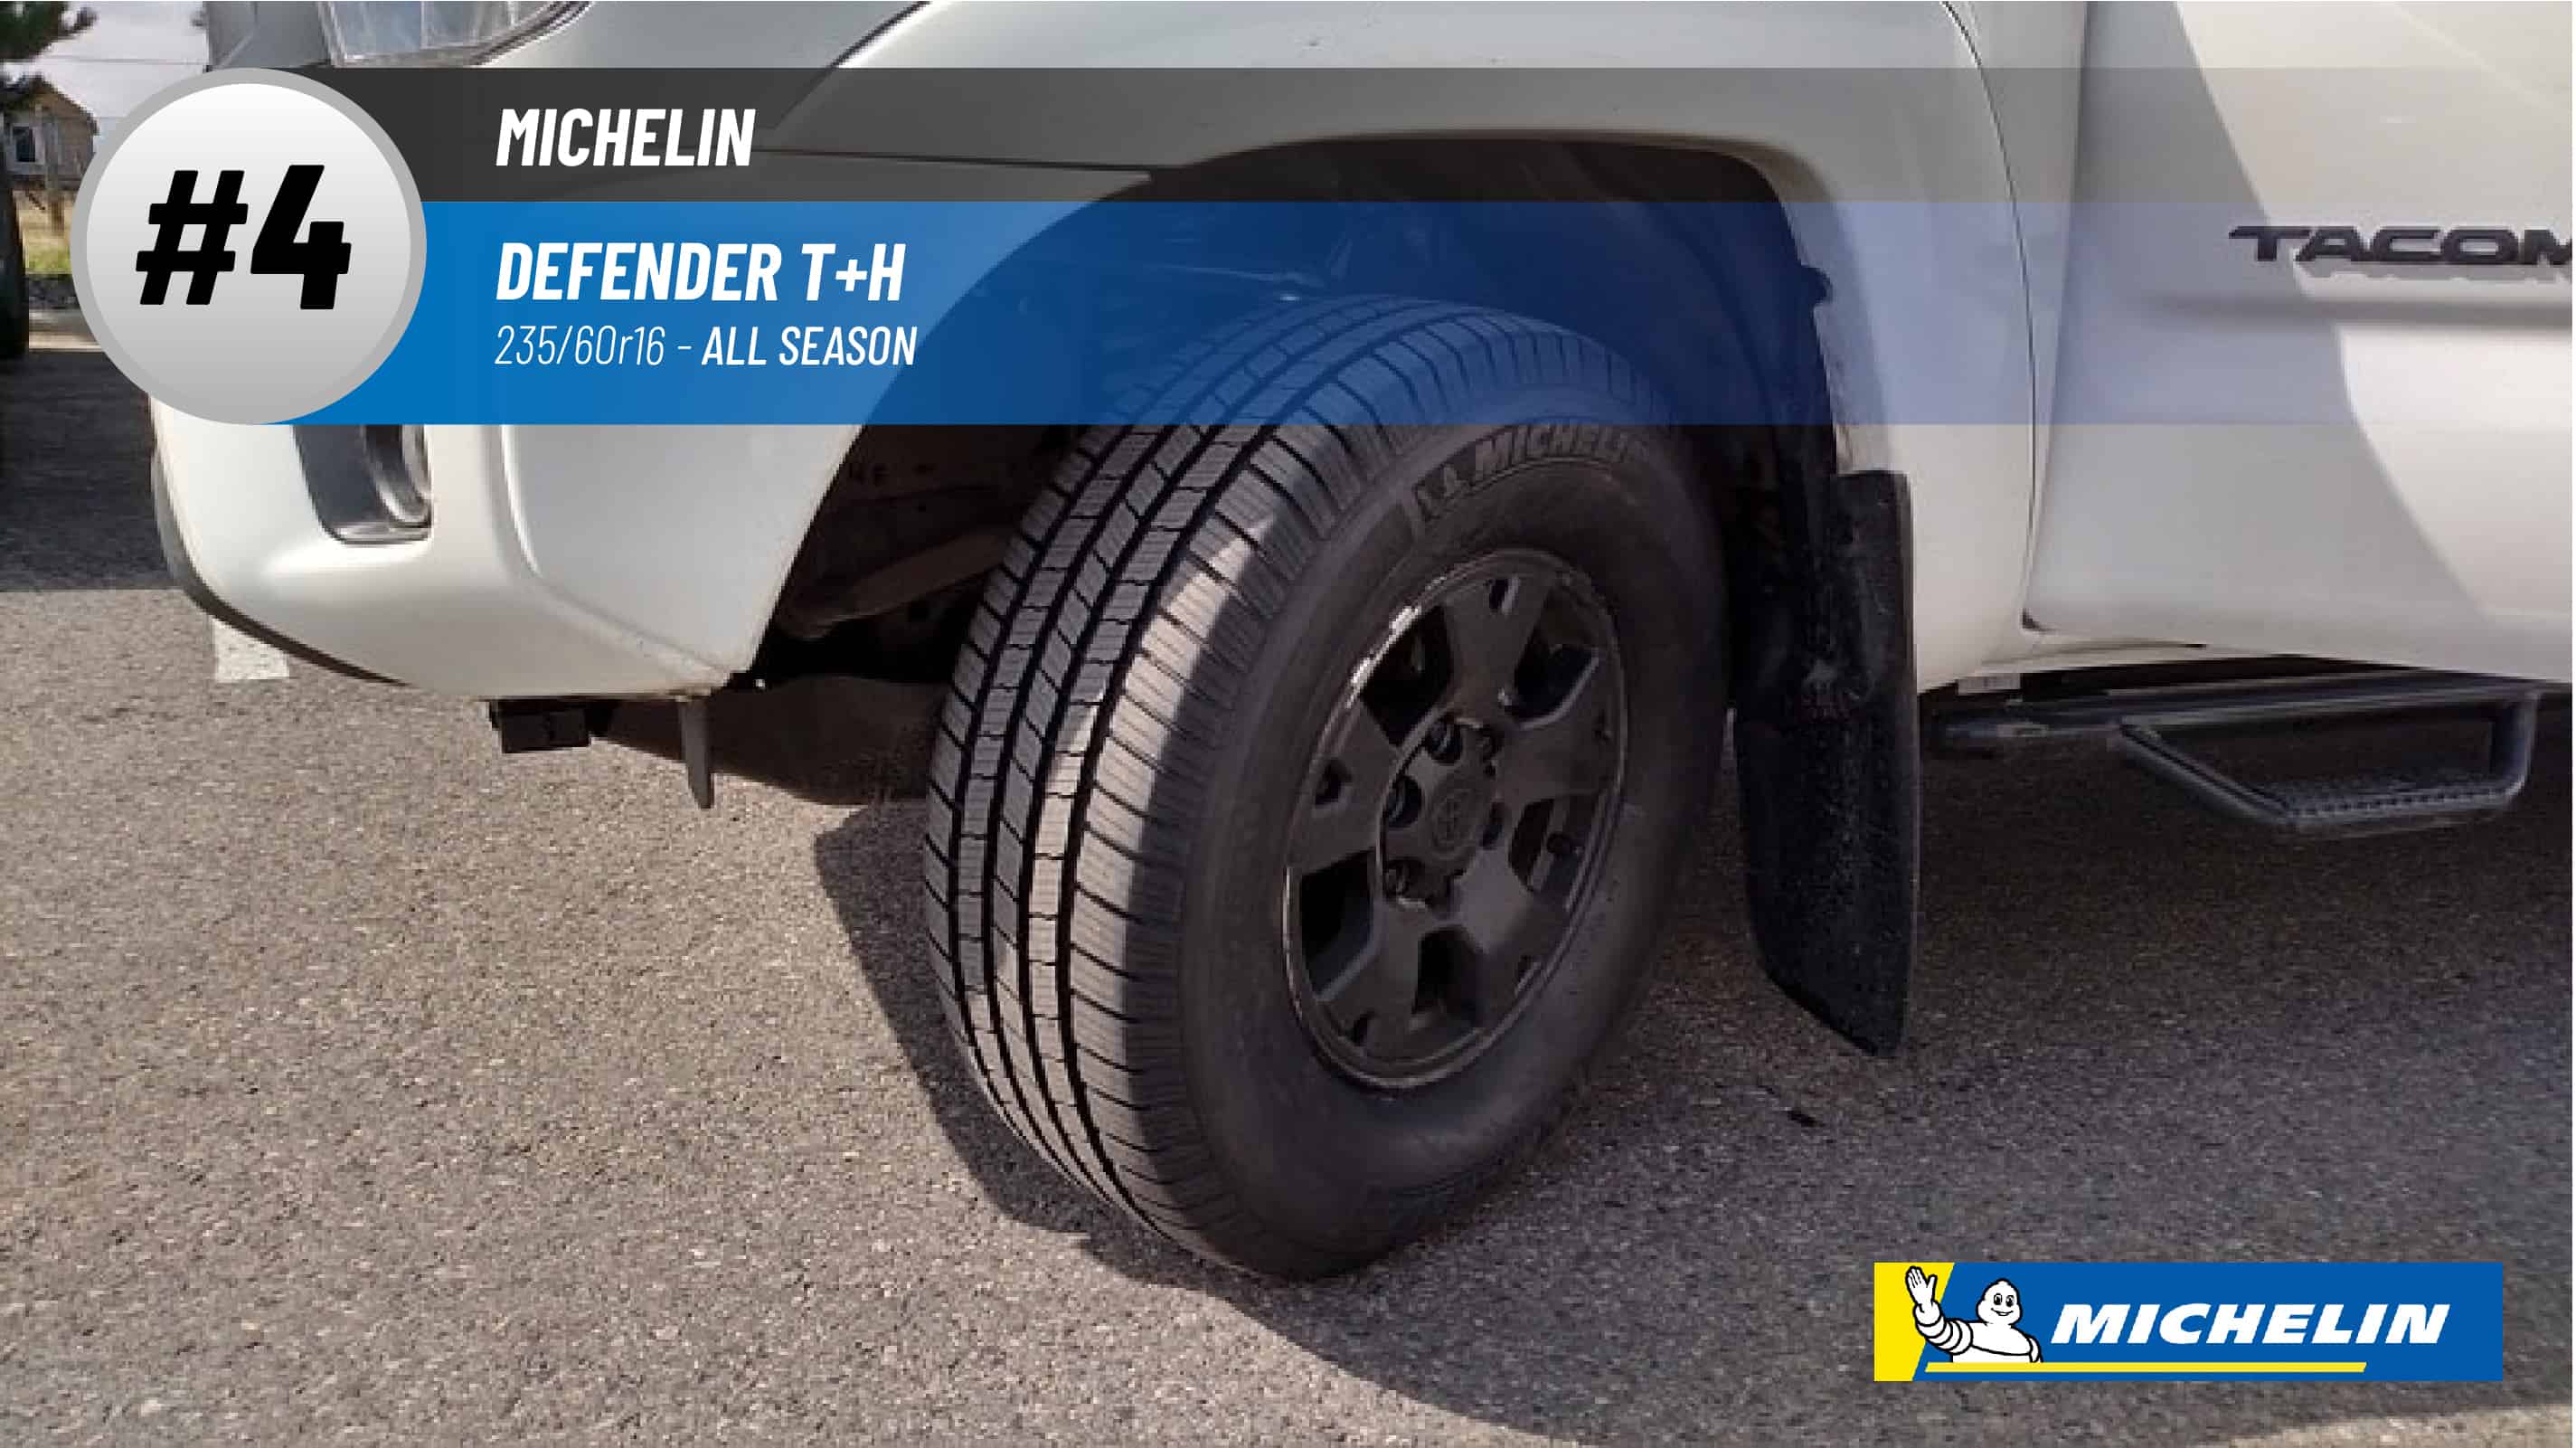 Top #4 All Season Tires: Michelin Defender T+H – best 235/60r16